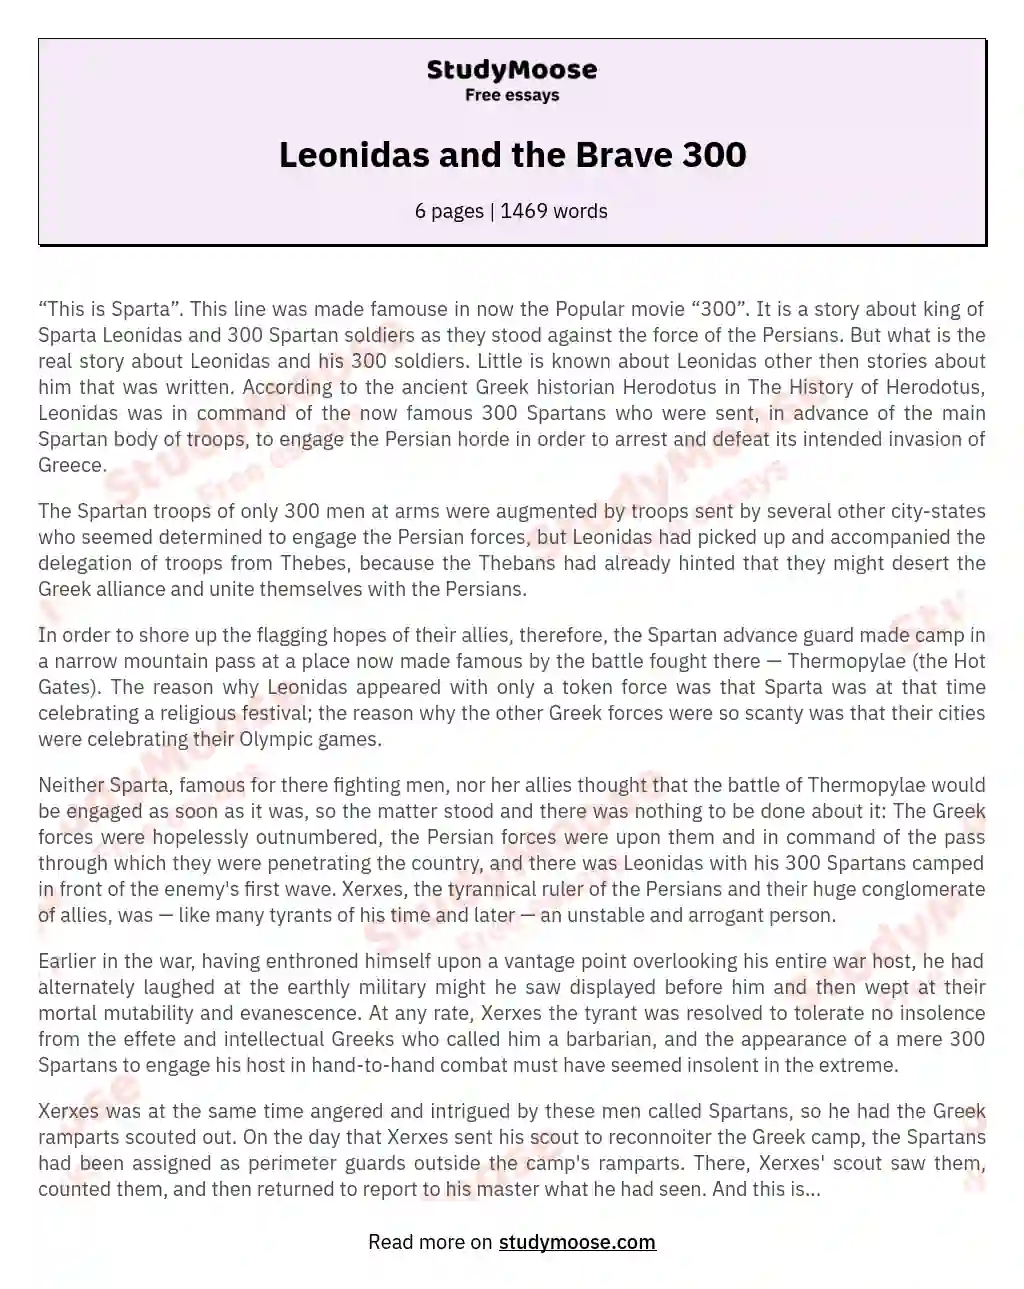 Leonidas and the Brave 300